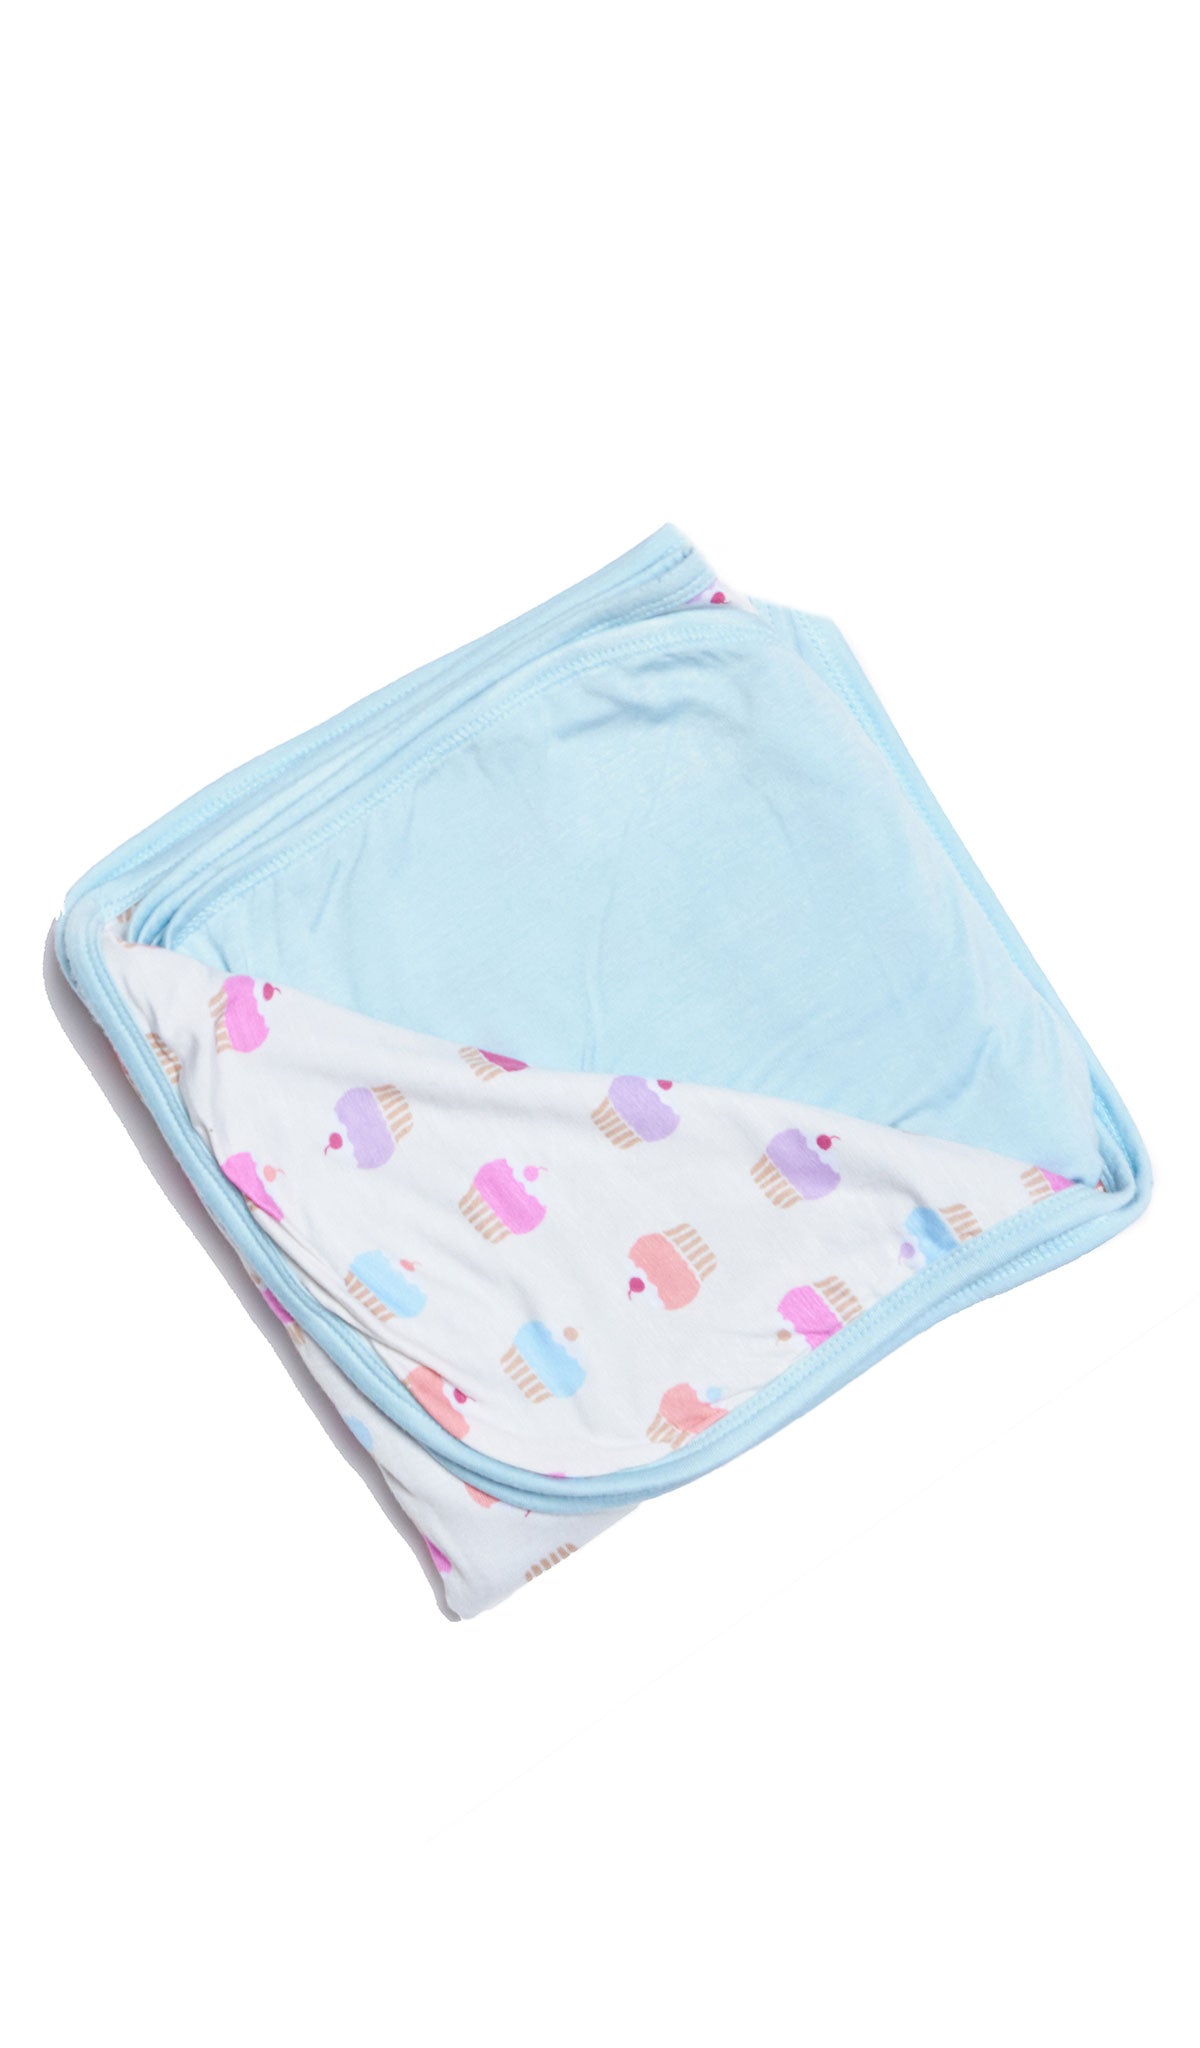 Swaddle Blanket Cupcakes Everly Grey